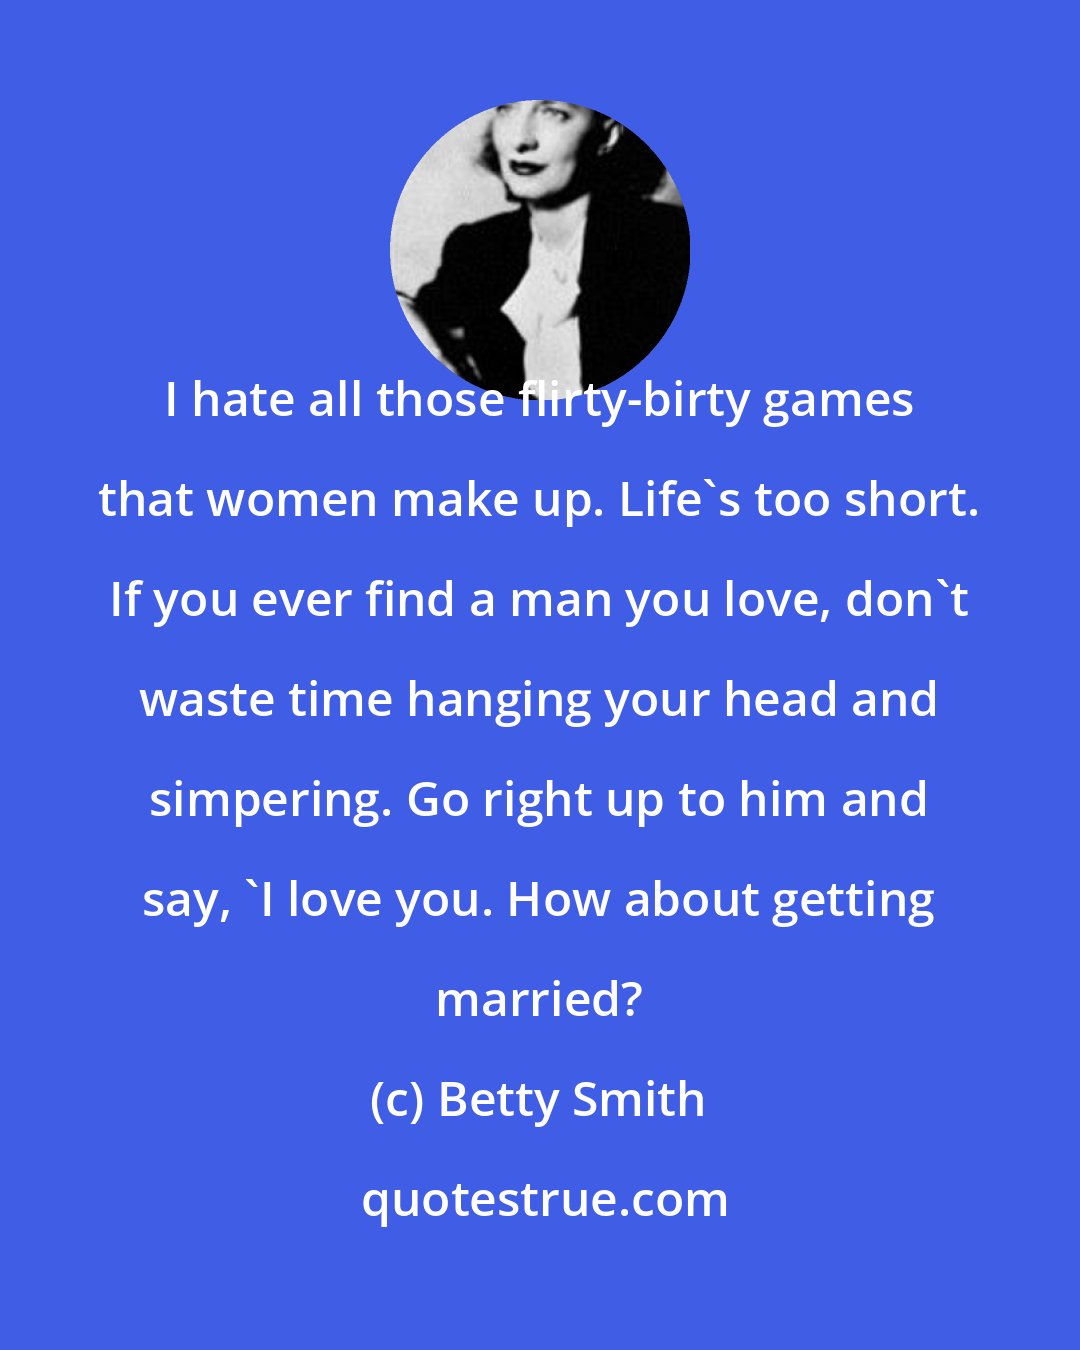 Betty Smith: I hate all those flirty-birty games that women make up. Life's too short. If you ever find a man you love, don't waste time hanging your head and simpering. Go right up to him and say, 'I love you. How about getting married?